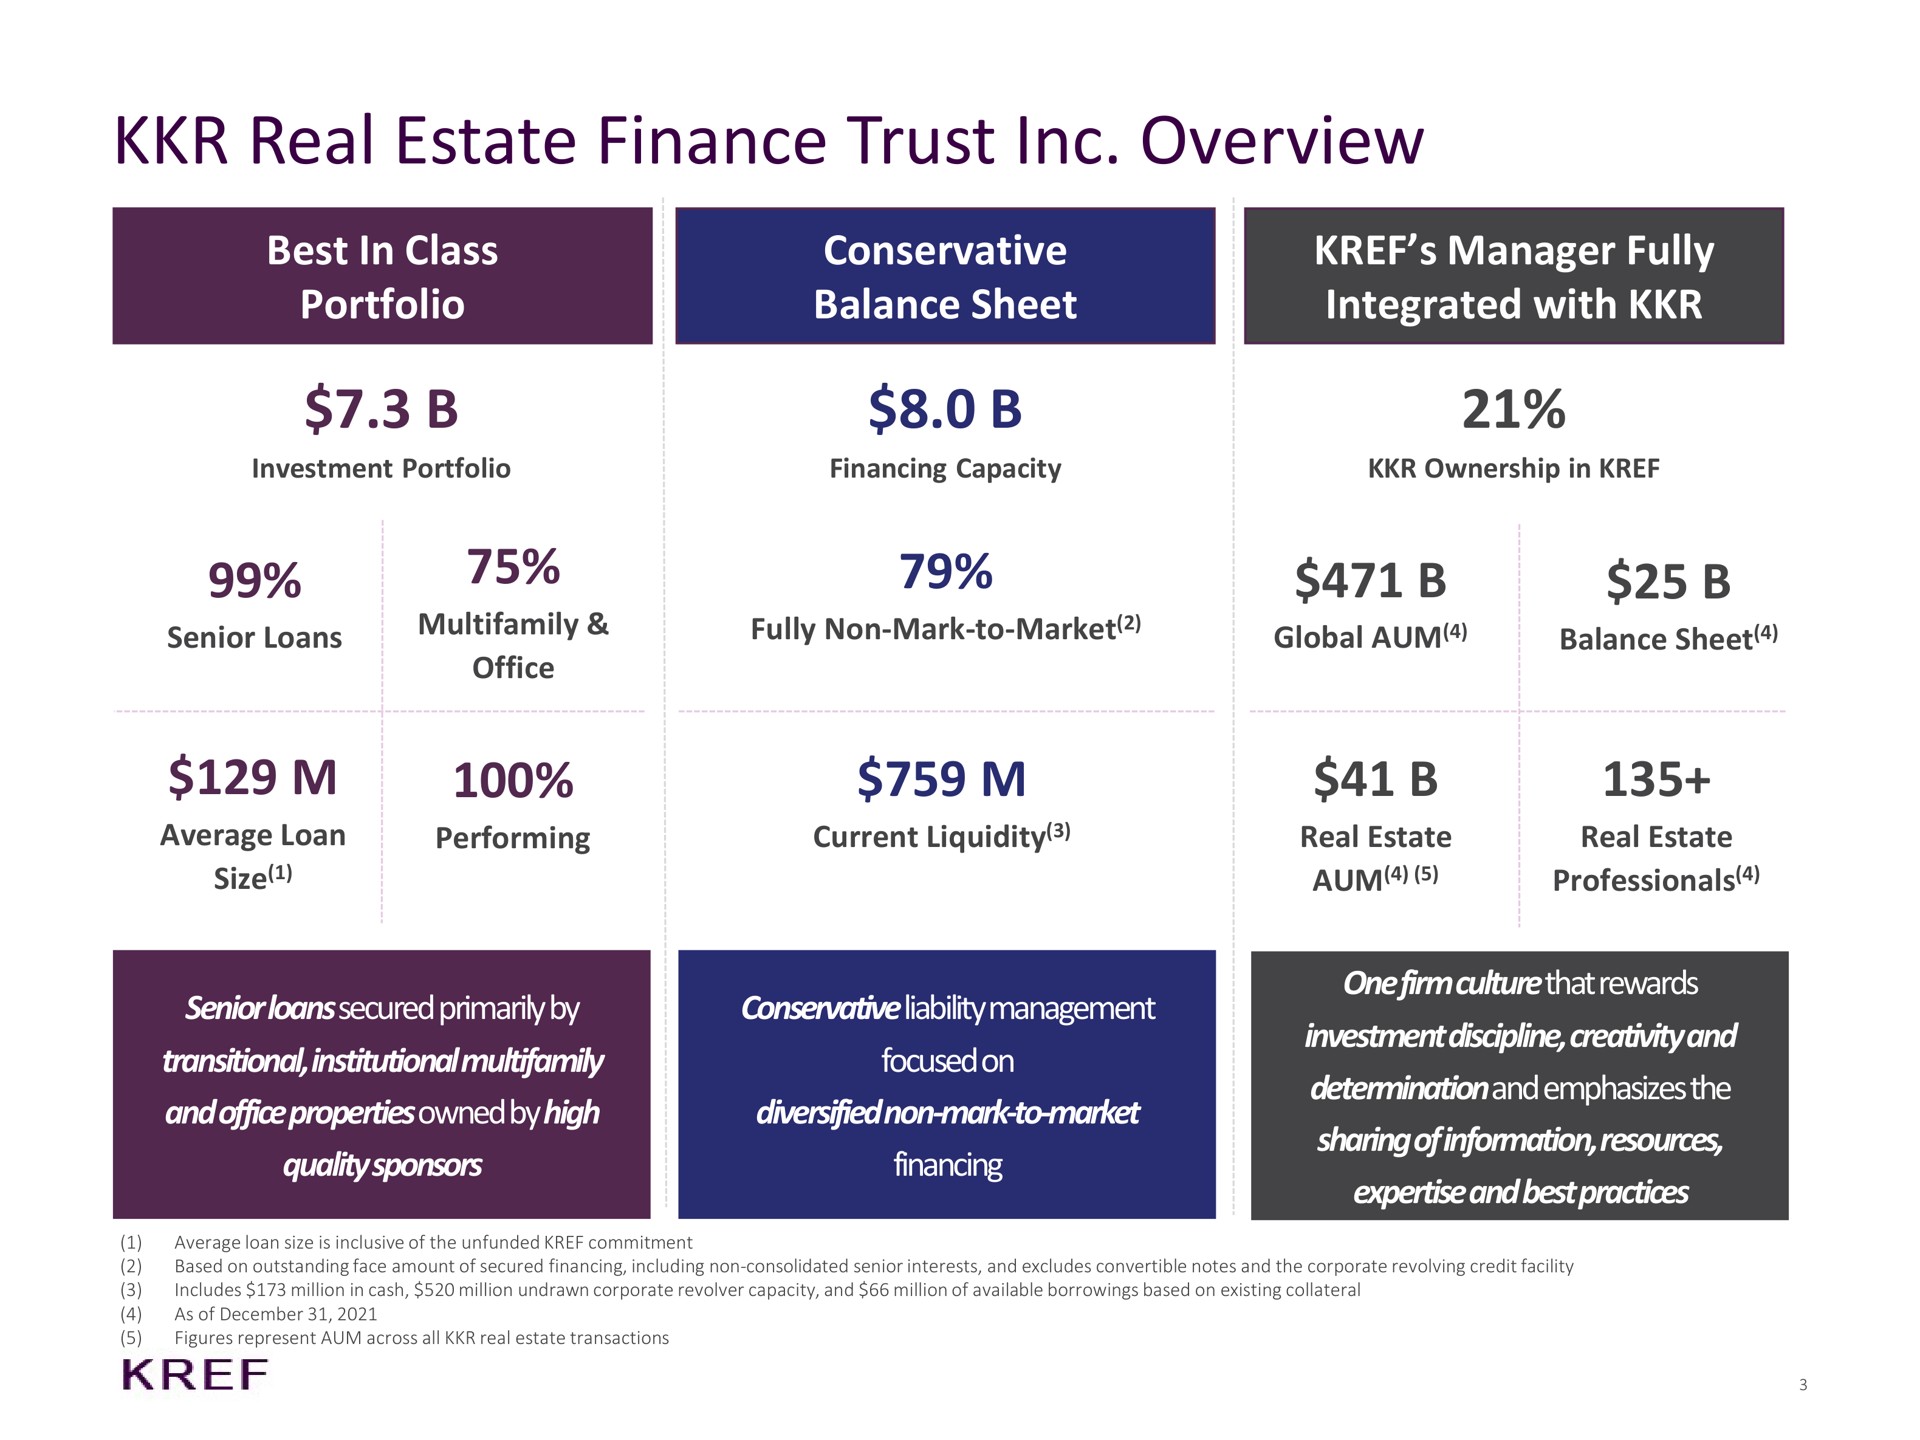 real estate finance trust overview best in class portfolio conservative balance sheet manager fully integrated with fully non mark to market global aum balance sheet senior loans office average loan size performing current liquidity senior loans secured primarily by transitional institutional and office properties owned by high quality sponsors management focused on diversified non mark to market financing real estate real estate professionals one firm rewards investment discipline creativity and determination and emphasizes the sharing of information resources and best practices me liability culture that | KKR Real Estate Finance Trust